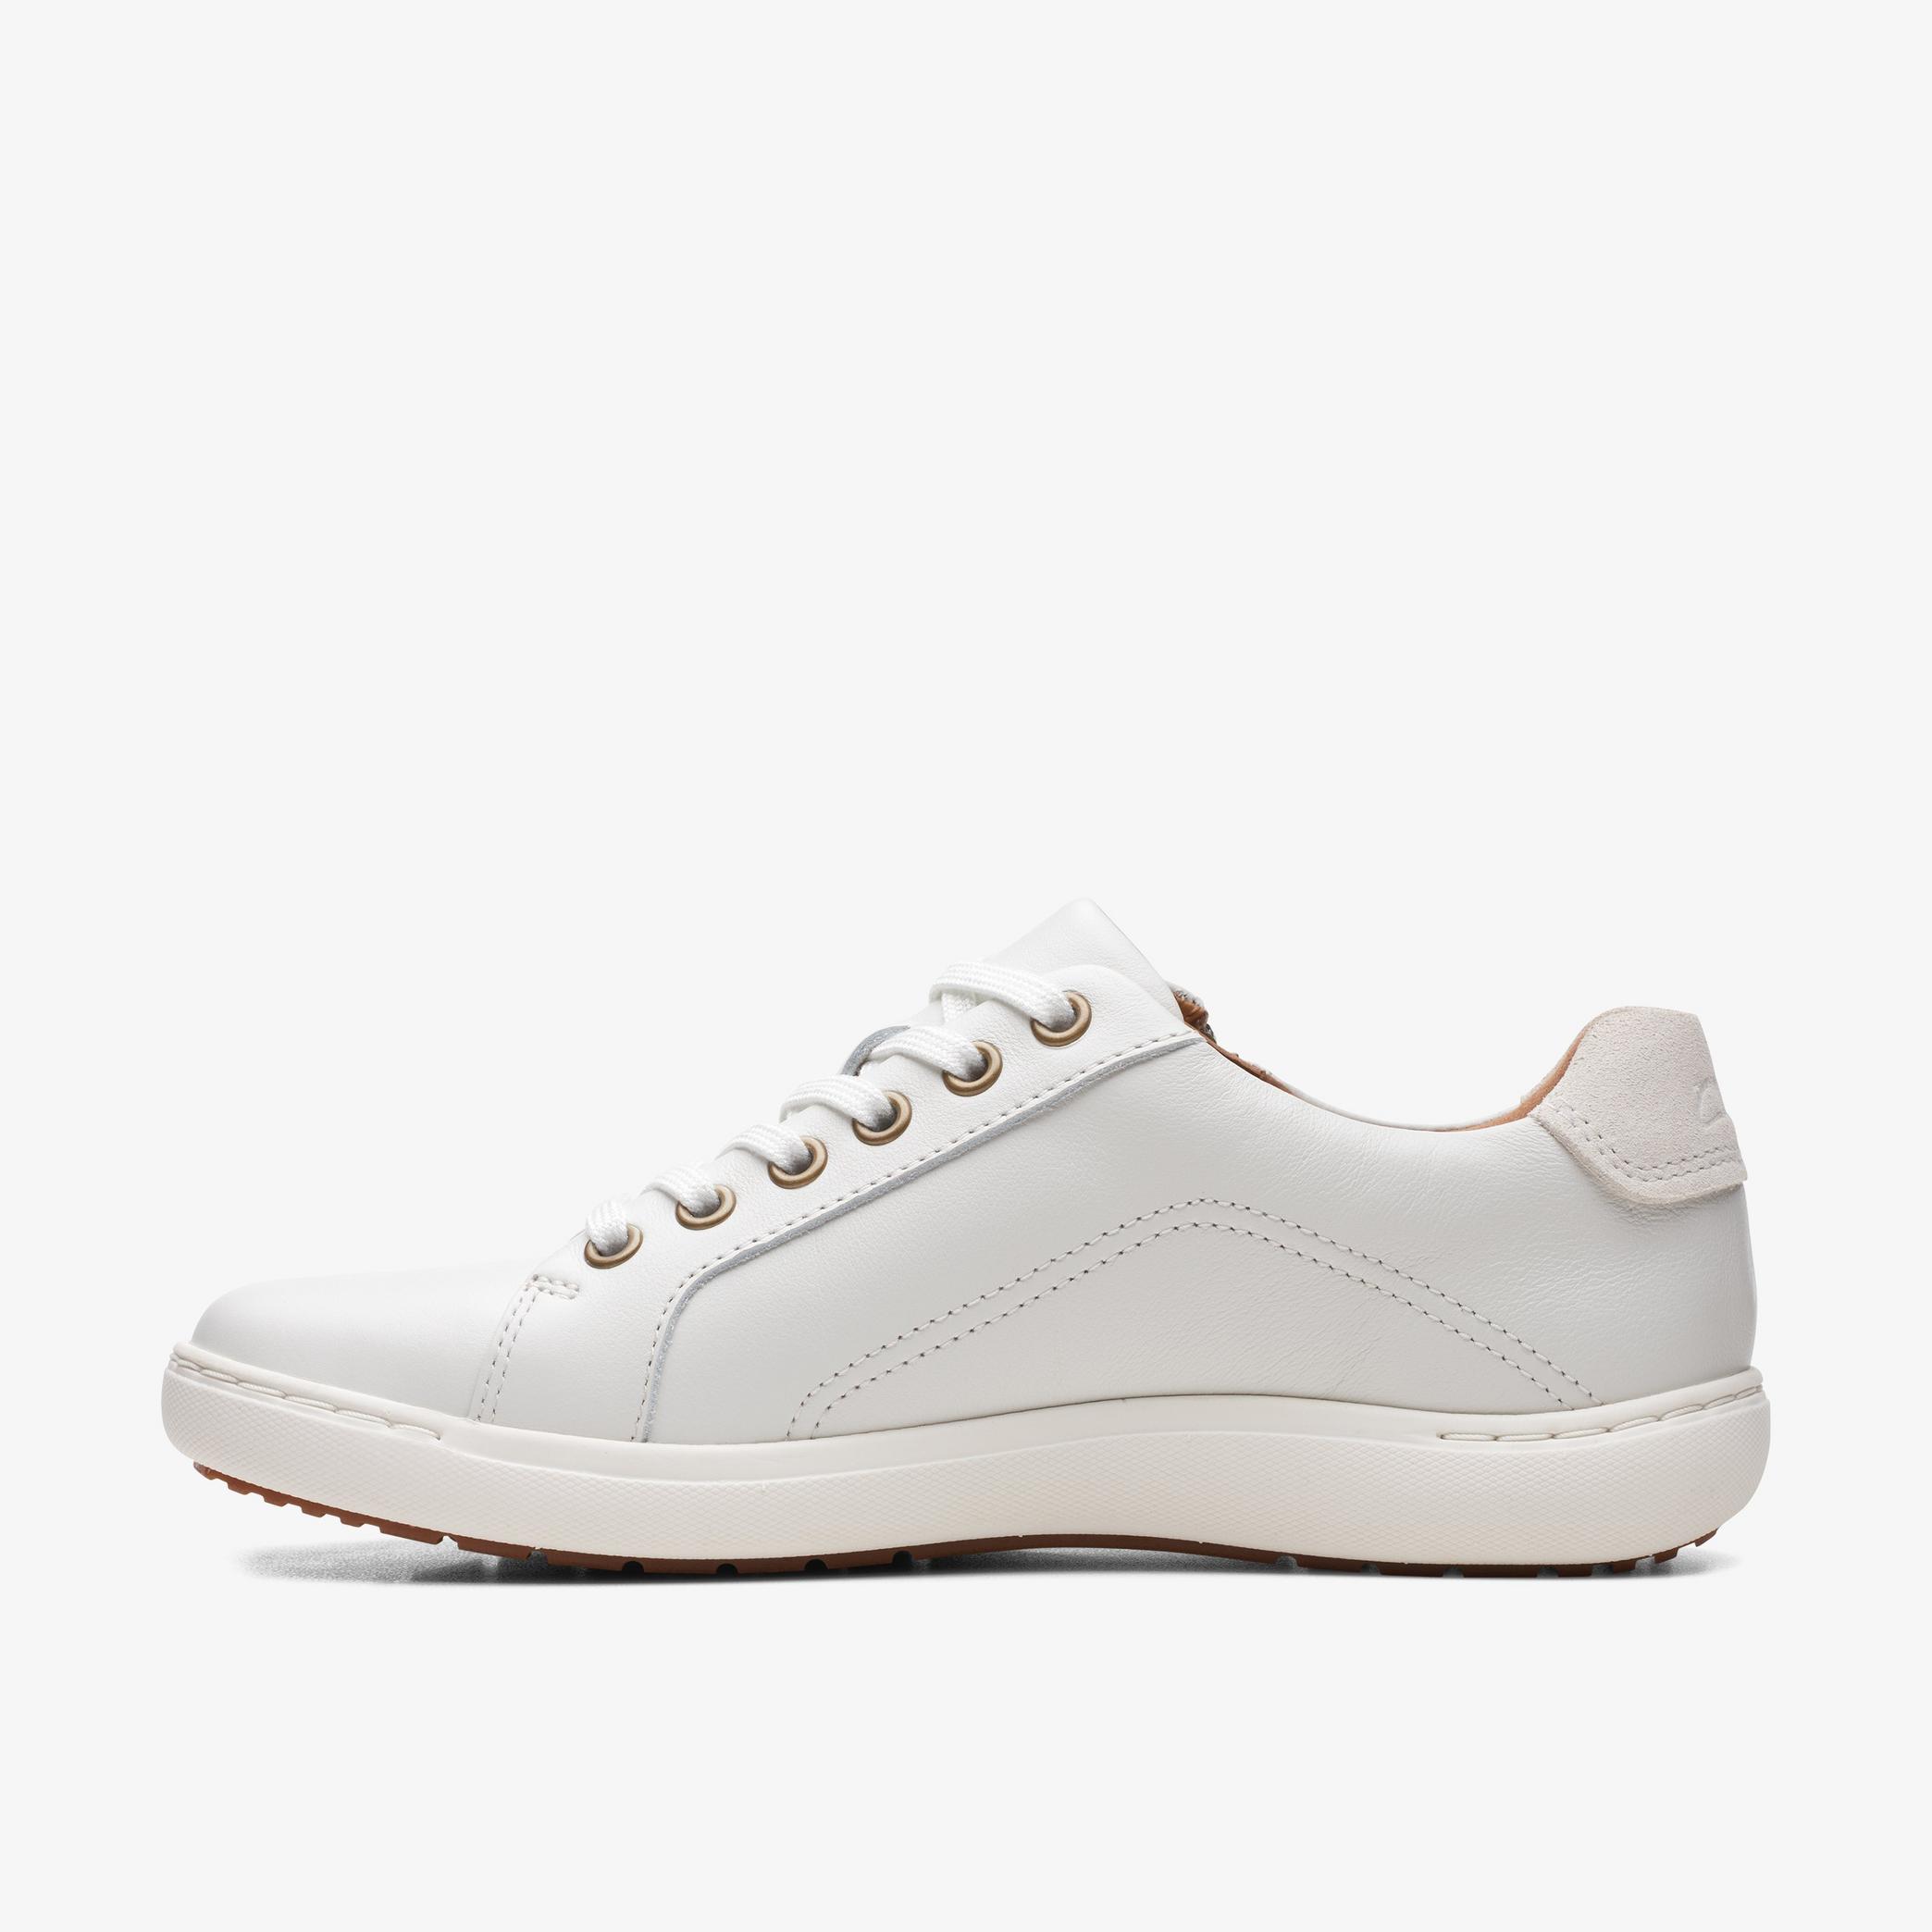 Nalle Lace White Leather Sneakers, view 2 of 6